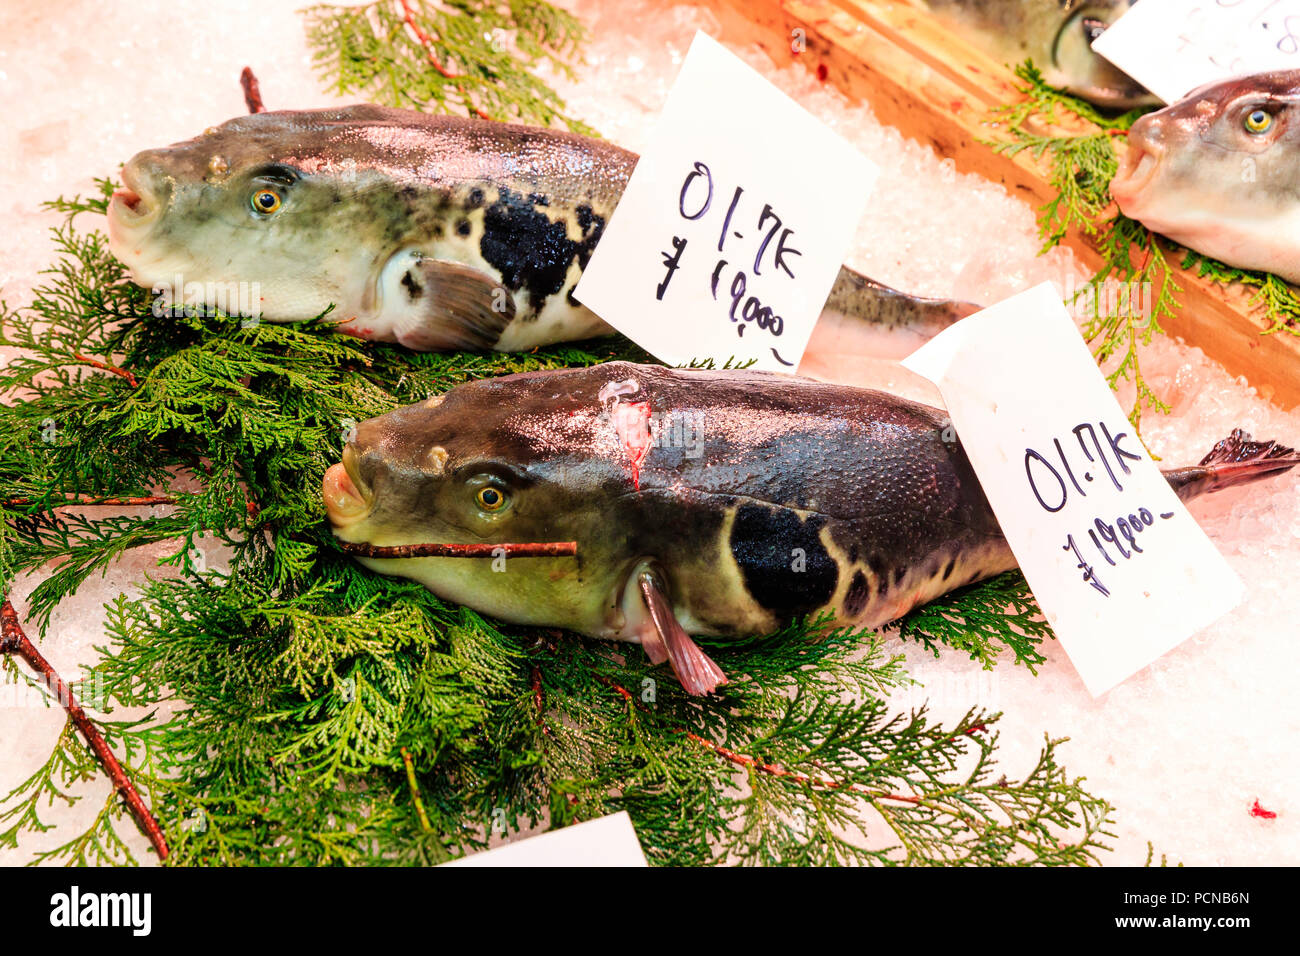 Kuromon Ichiba, Osaka's kitchen food market. Two Puffer fish, fugu, on bed of ice with price labels ready for sale. Stock Photo